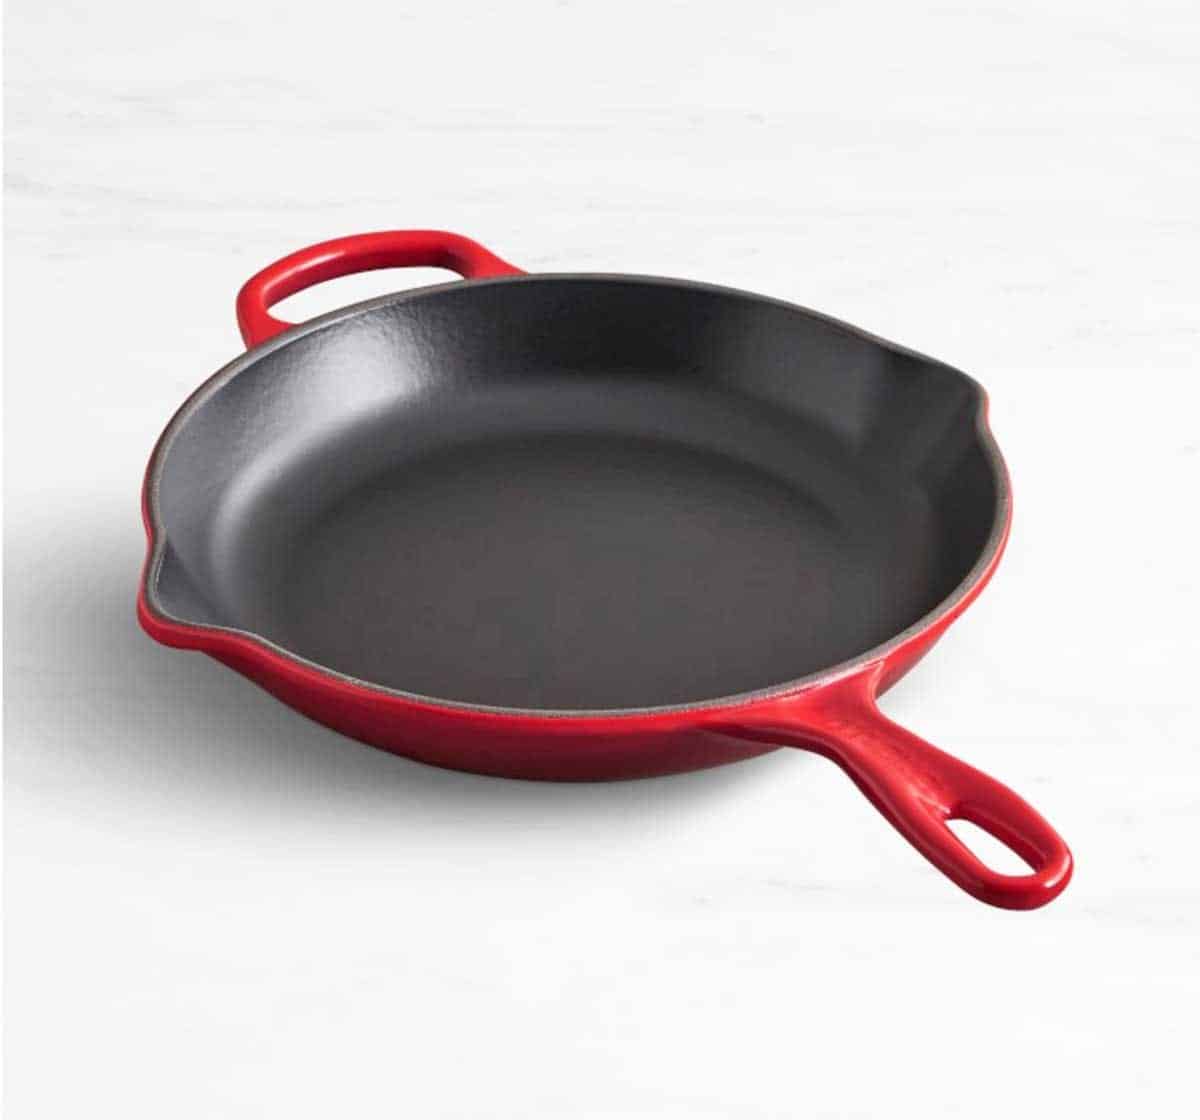 Le Creuset enameled cast iron skillet in cherry red color. 